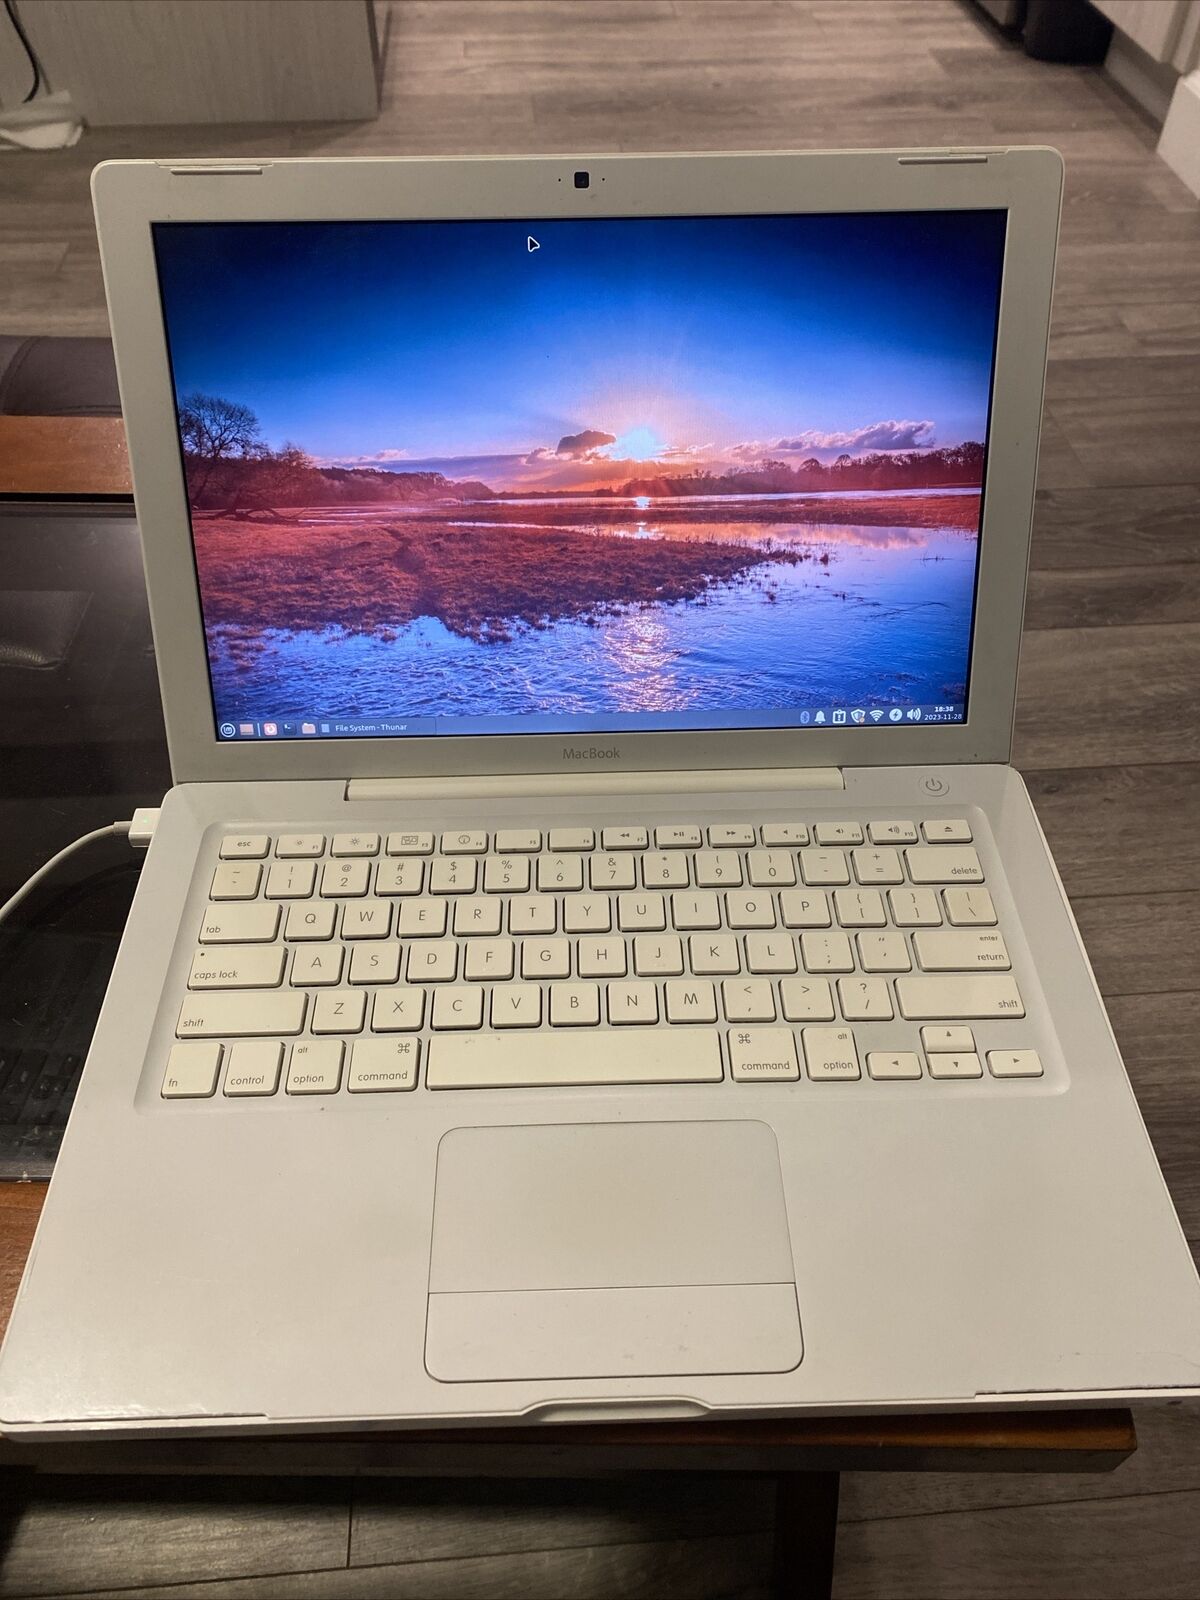 Apple MacBook With Linux Mint Core 2 Duo 6 GB RAM 120 GB SSD *Bad Battery*